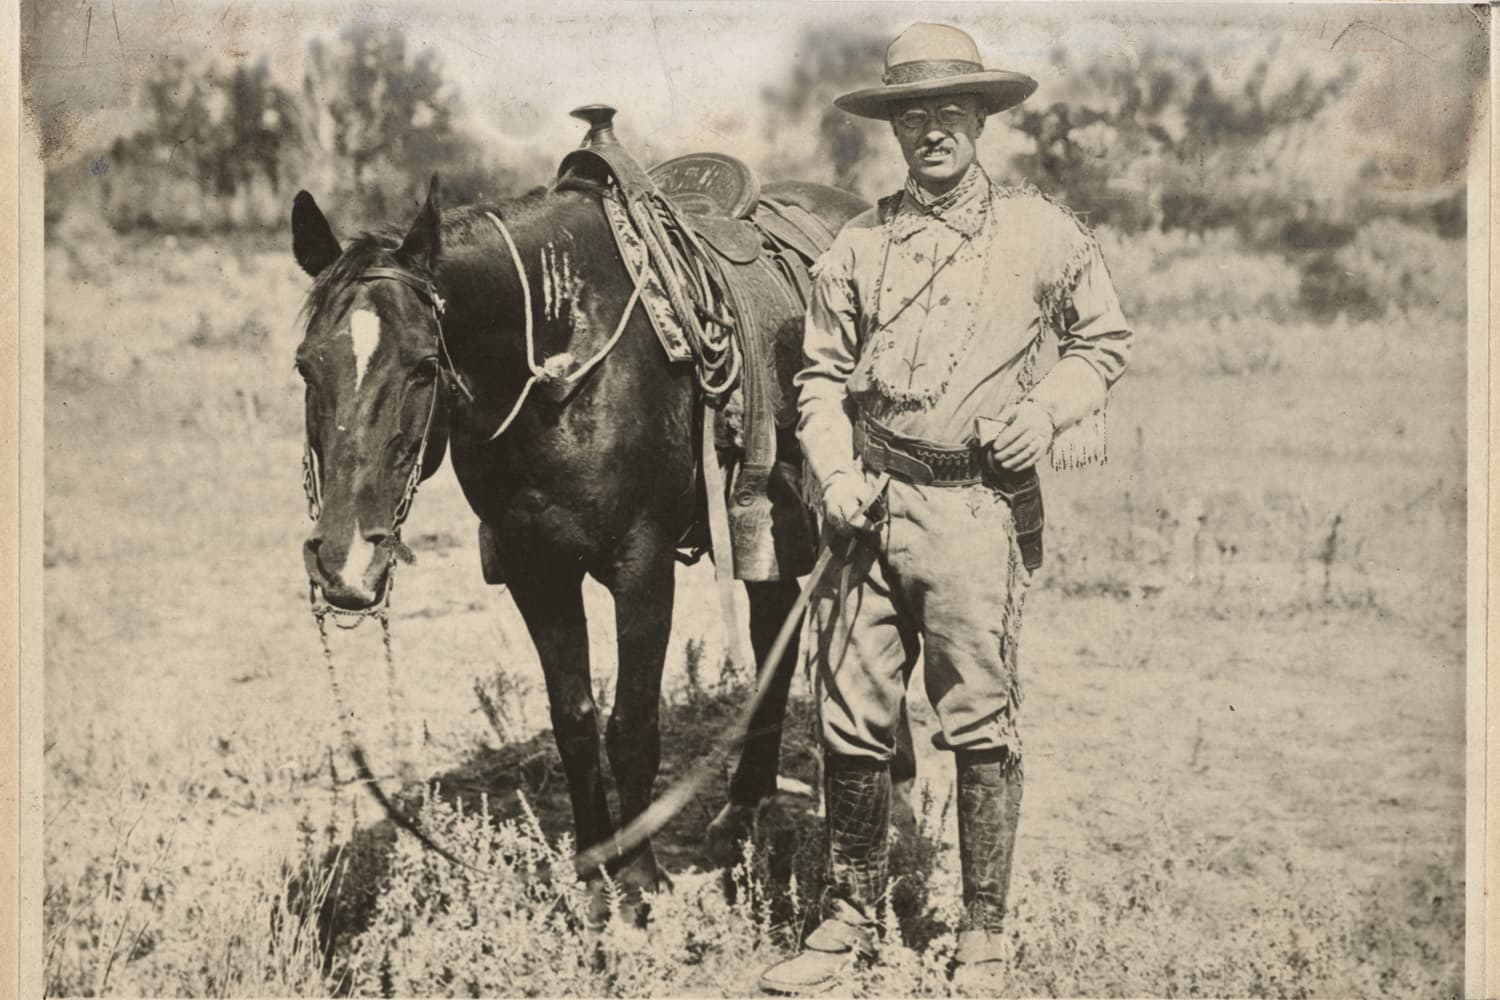 Cattle, Cowboys And Change In The Old West | On Point